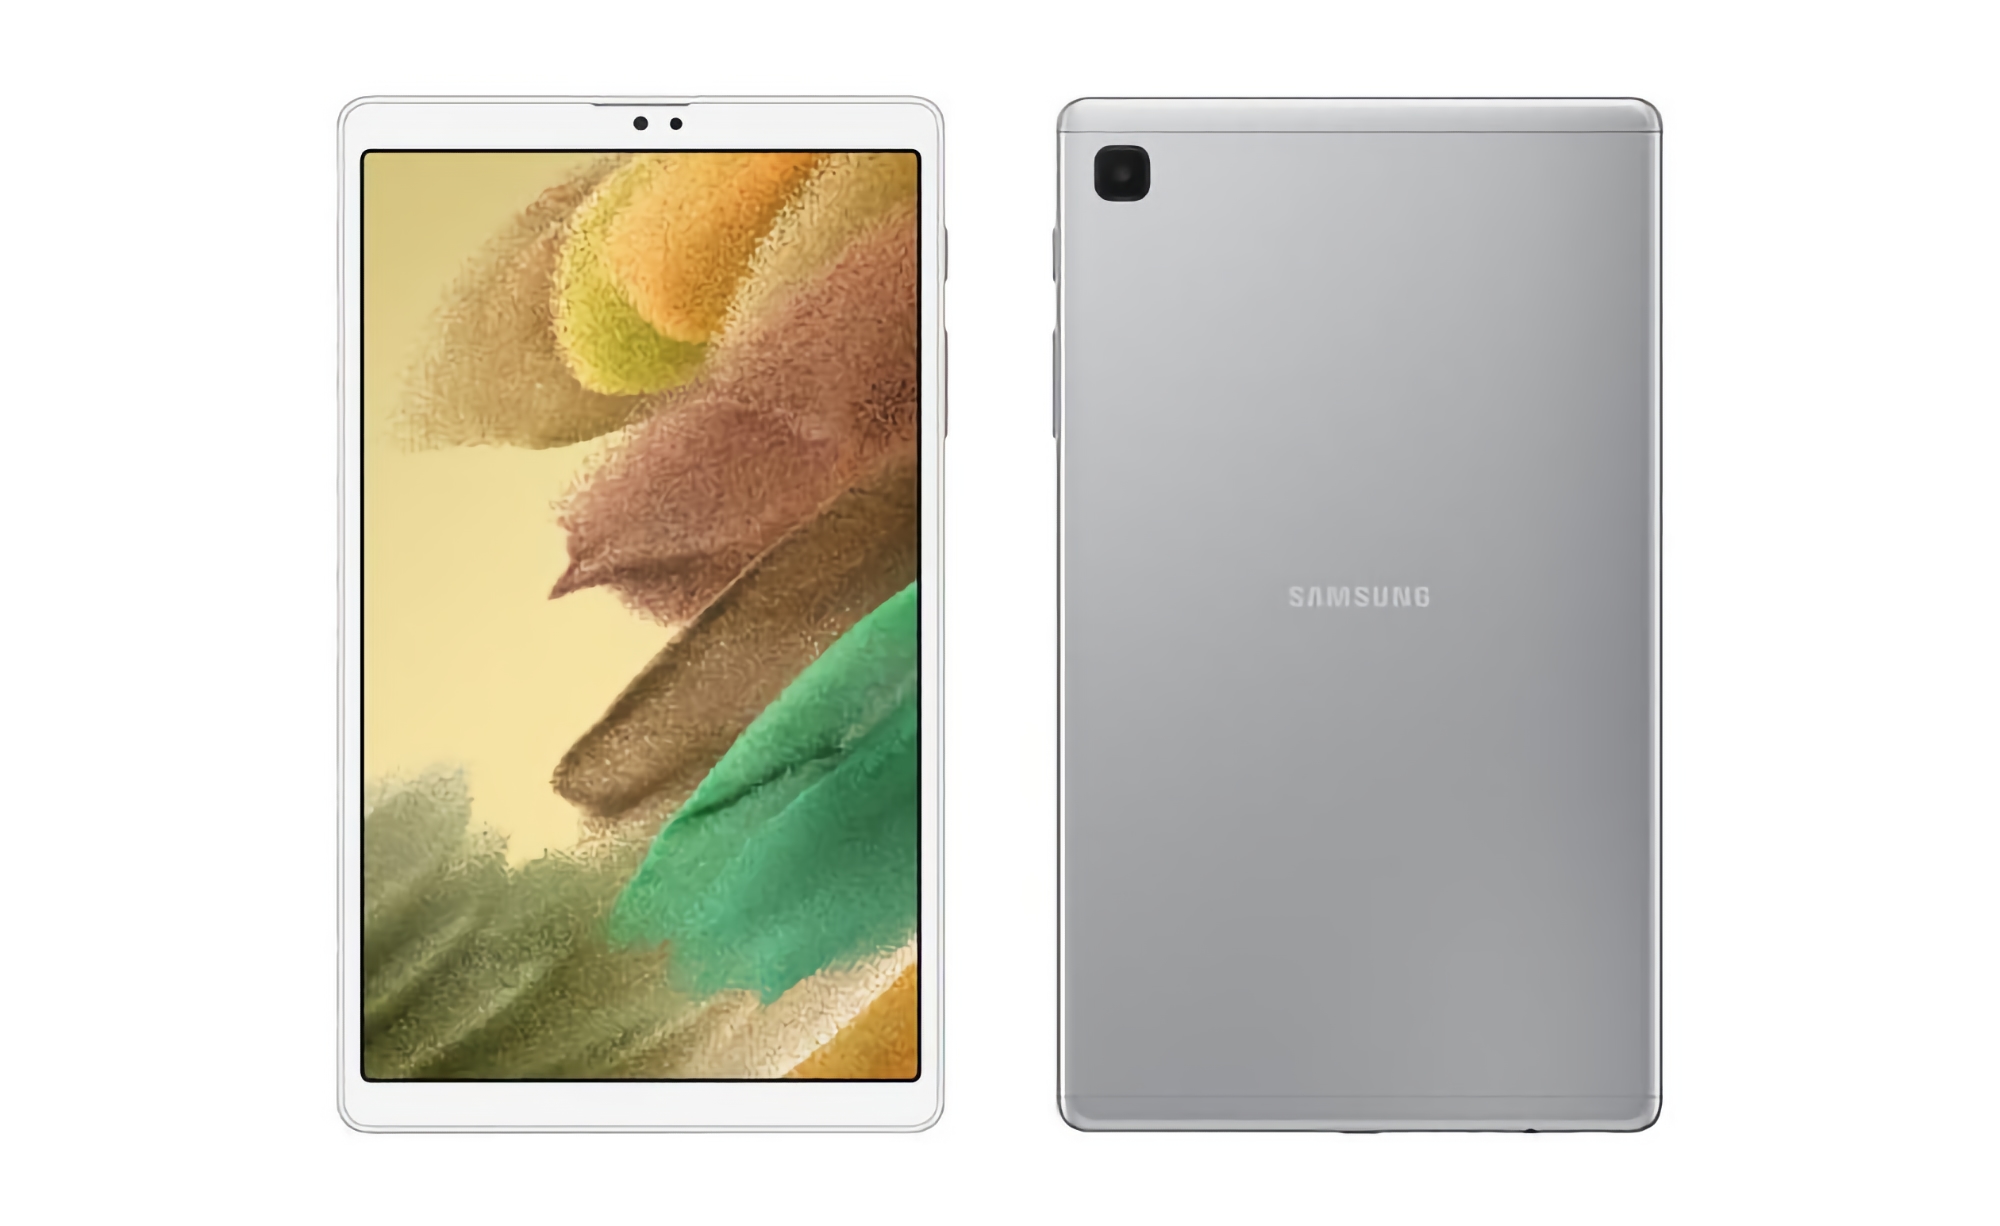 Samsung Galaxy Tab A7 Lite got Android 12 with One UI 4.1 filmware